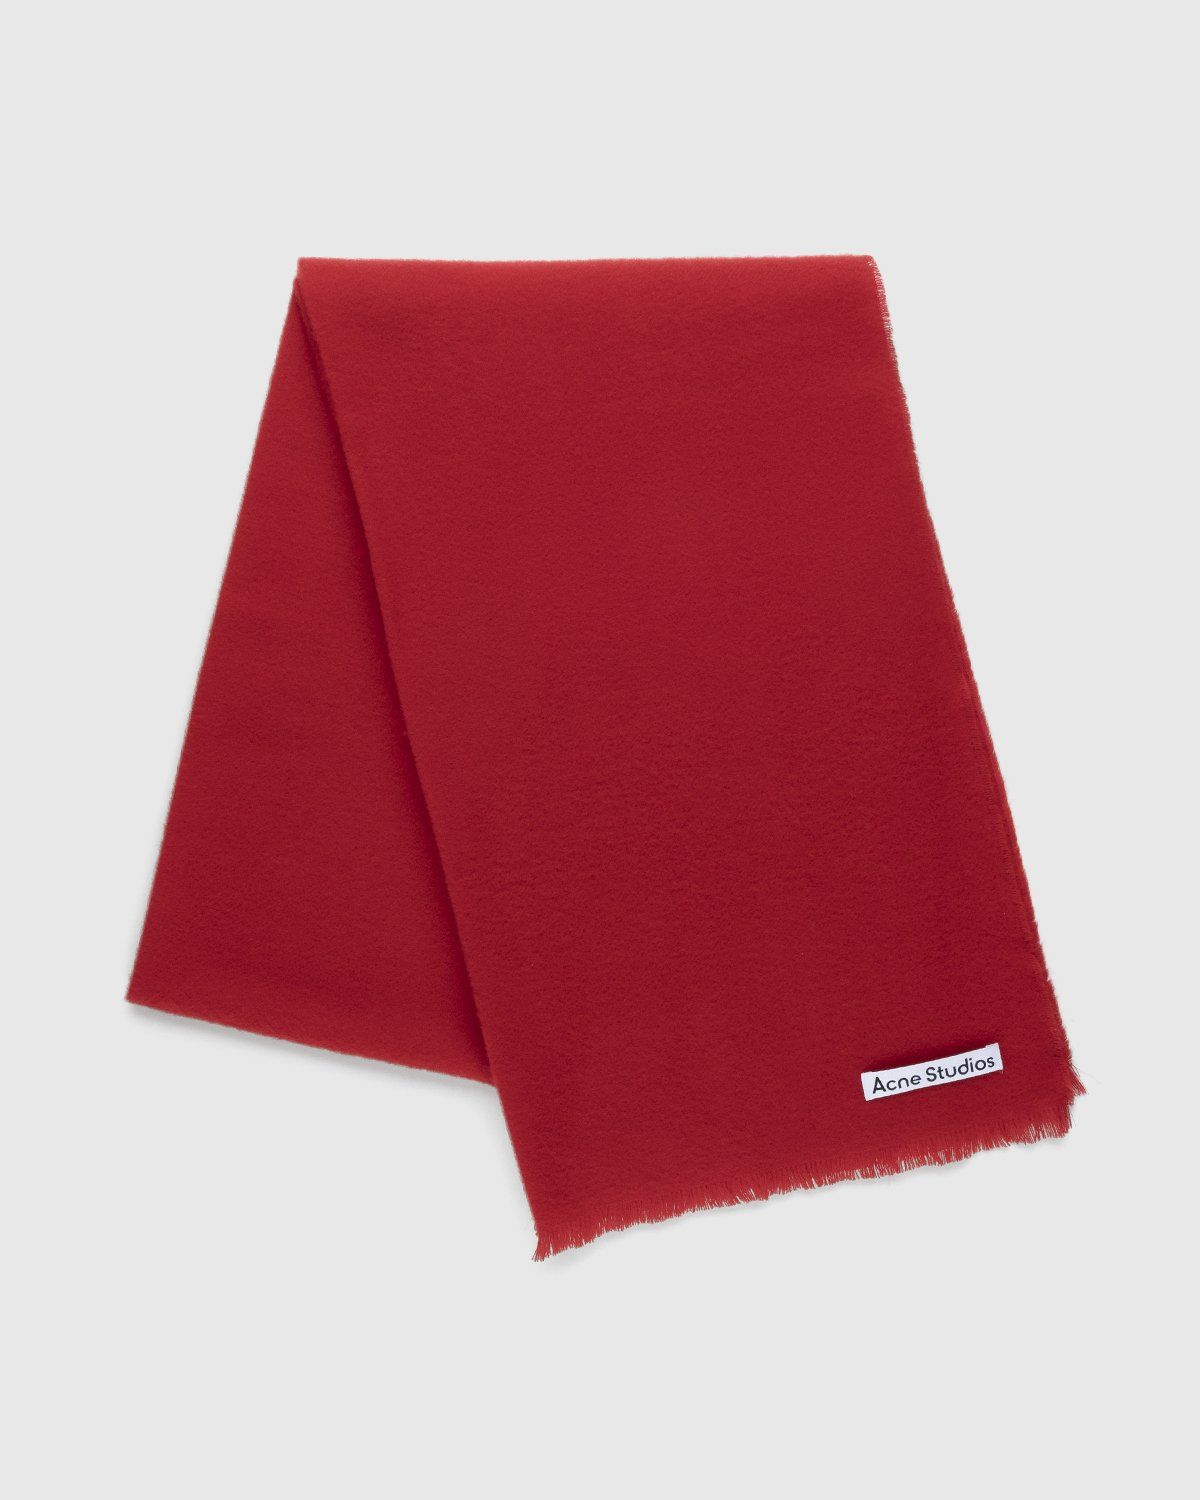 Acne Studios – Heavy Scarf Red - Knits - Red - Image 1